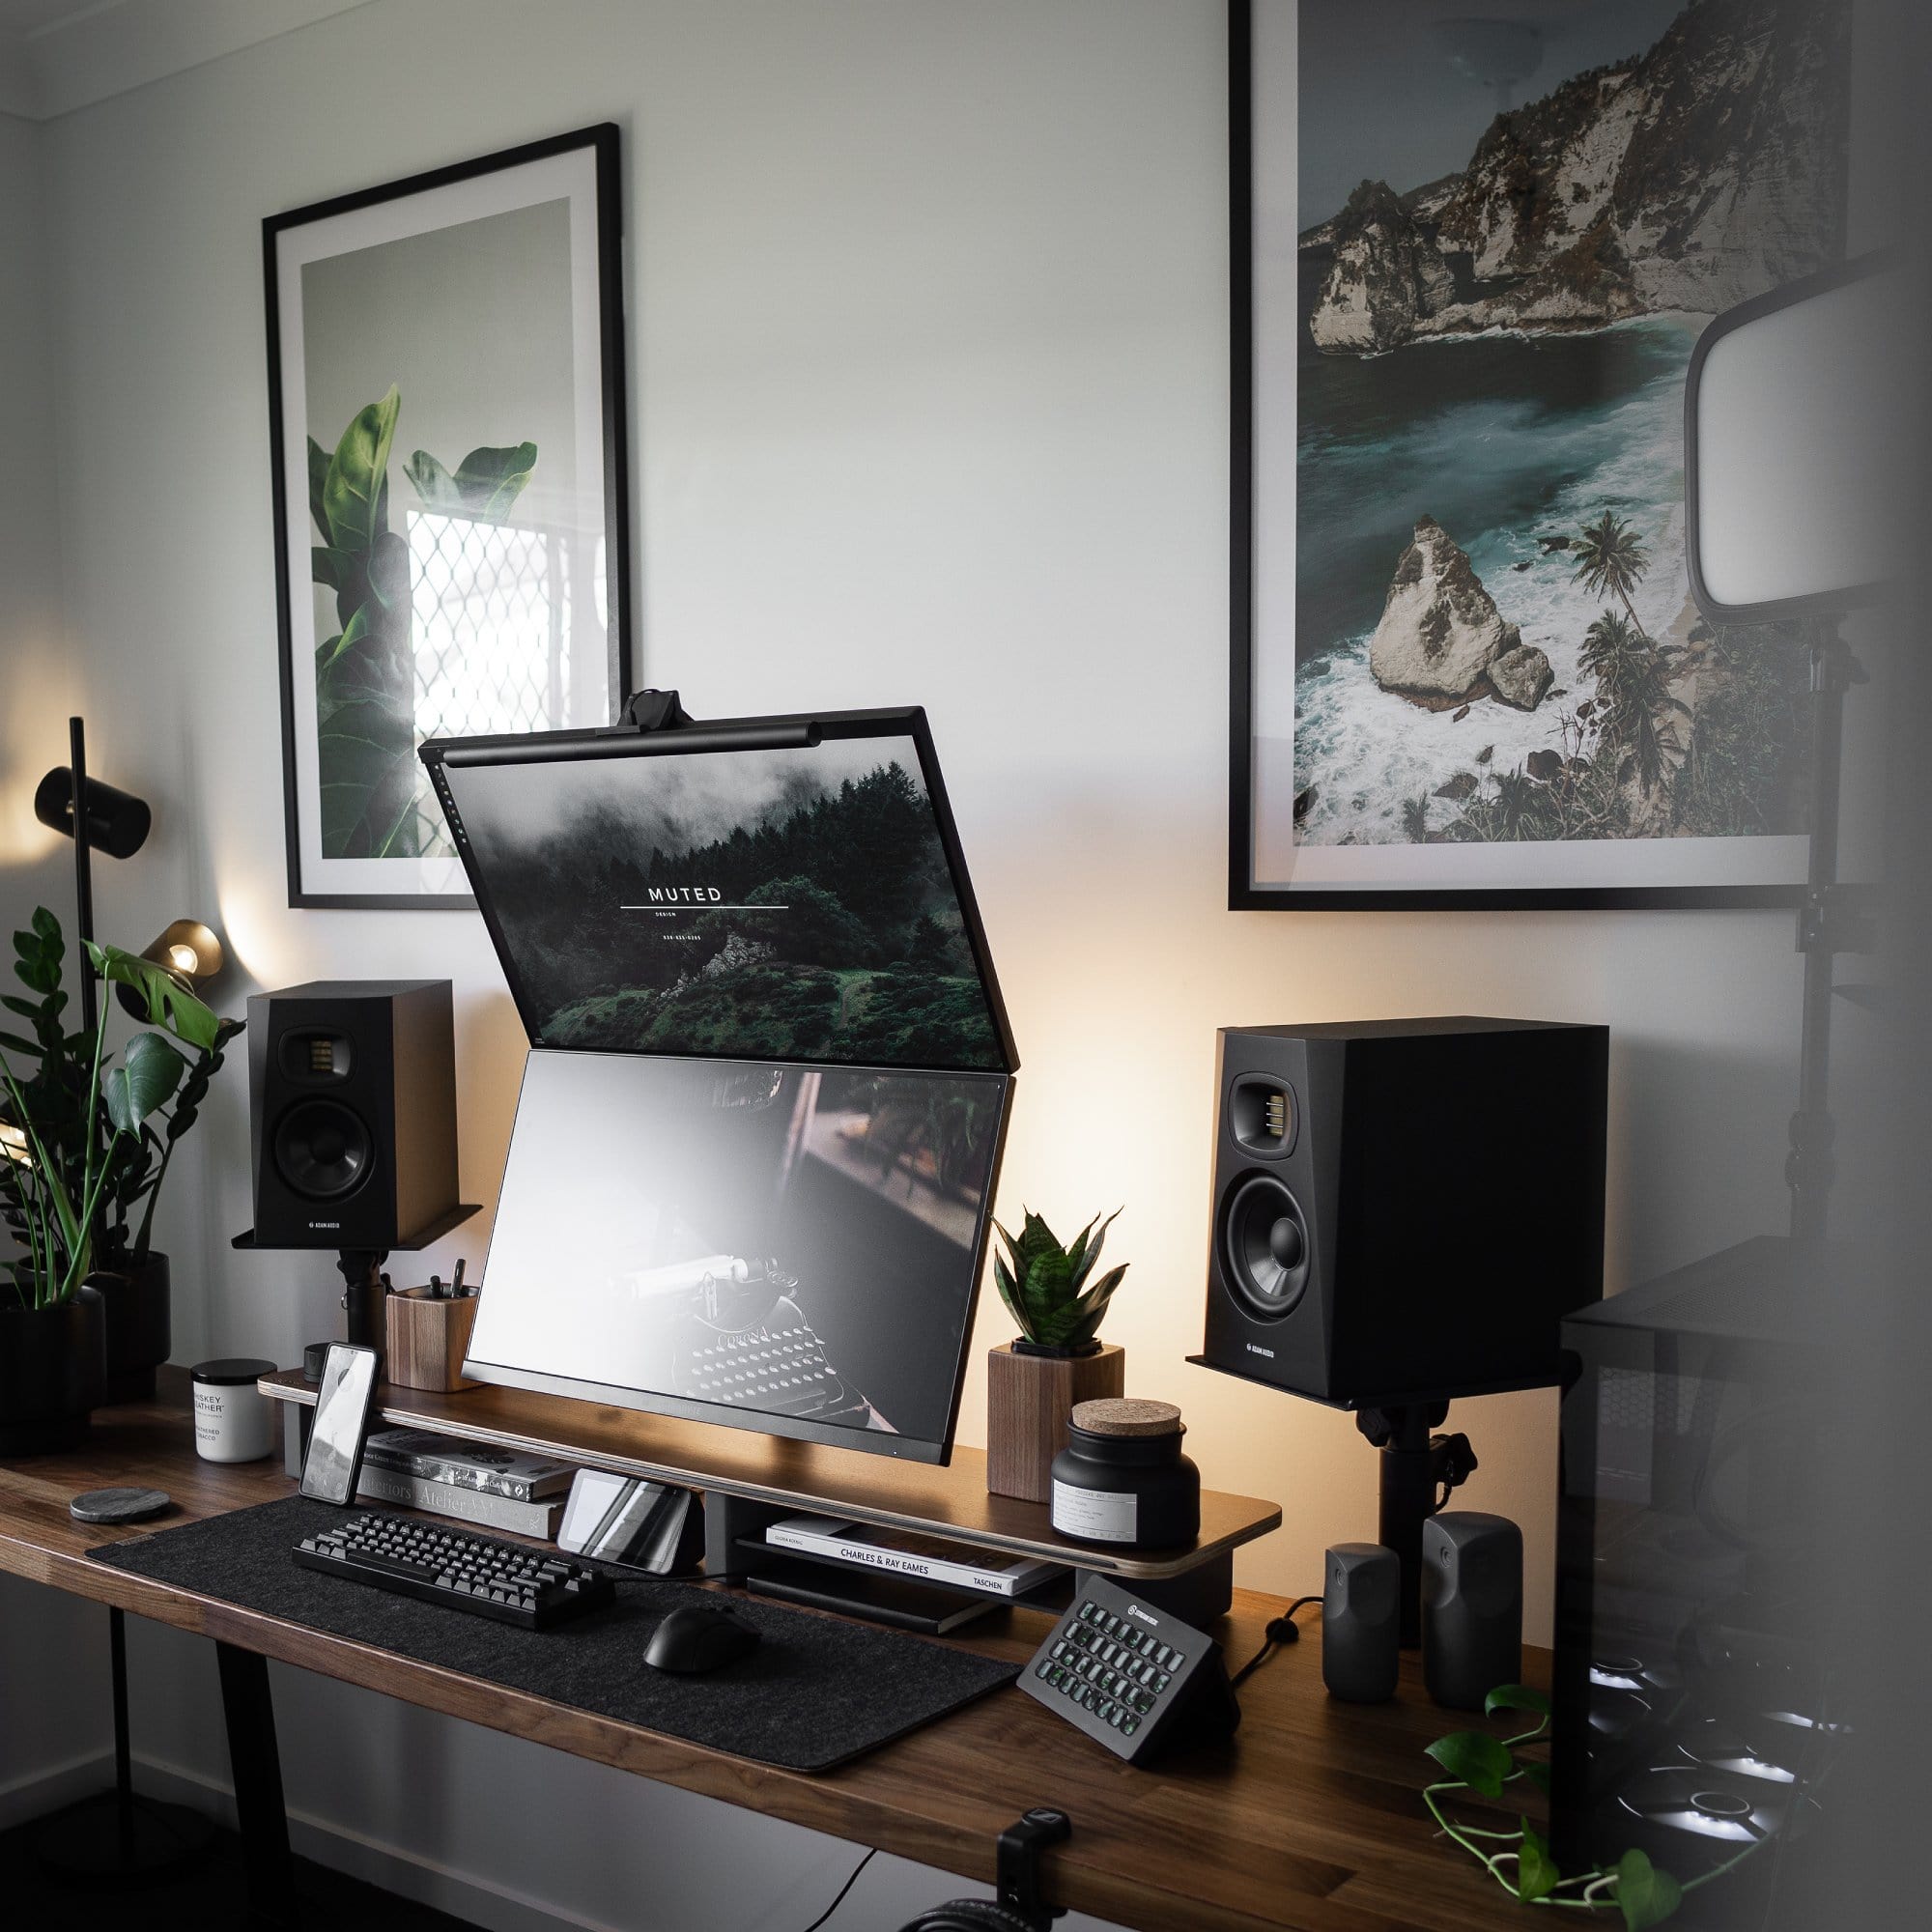 A vertically aligned multi-screen home workspace with natural light